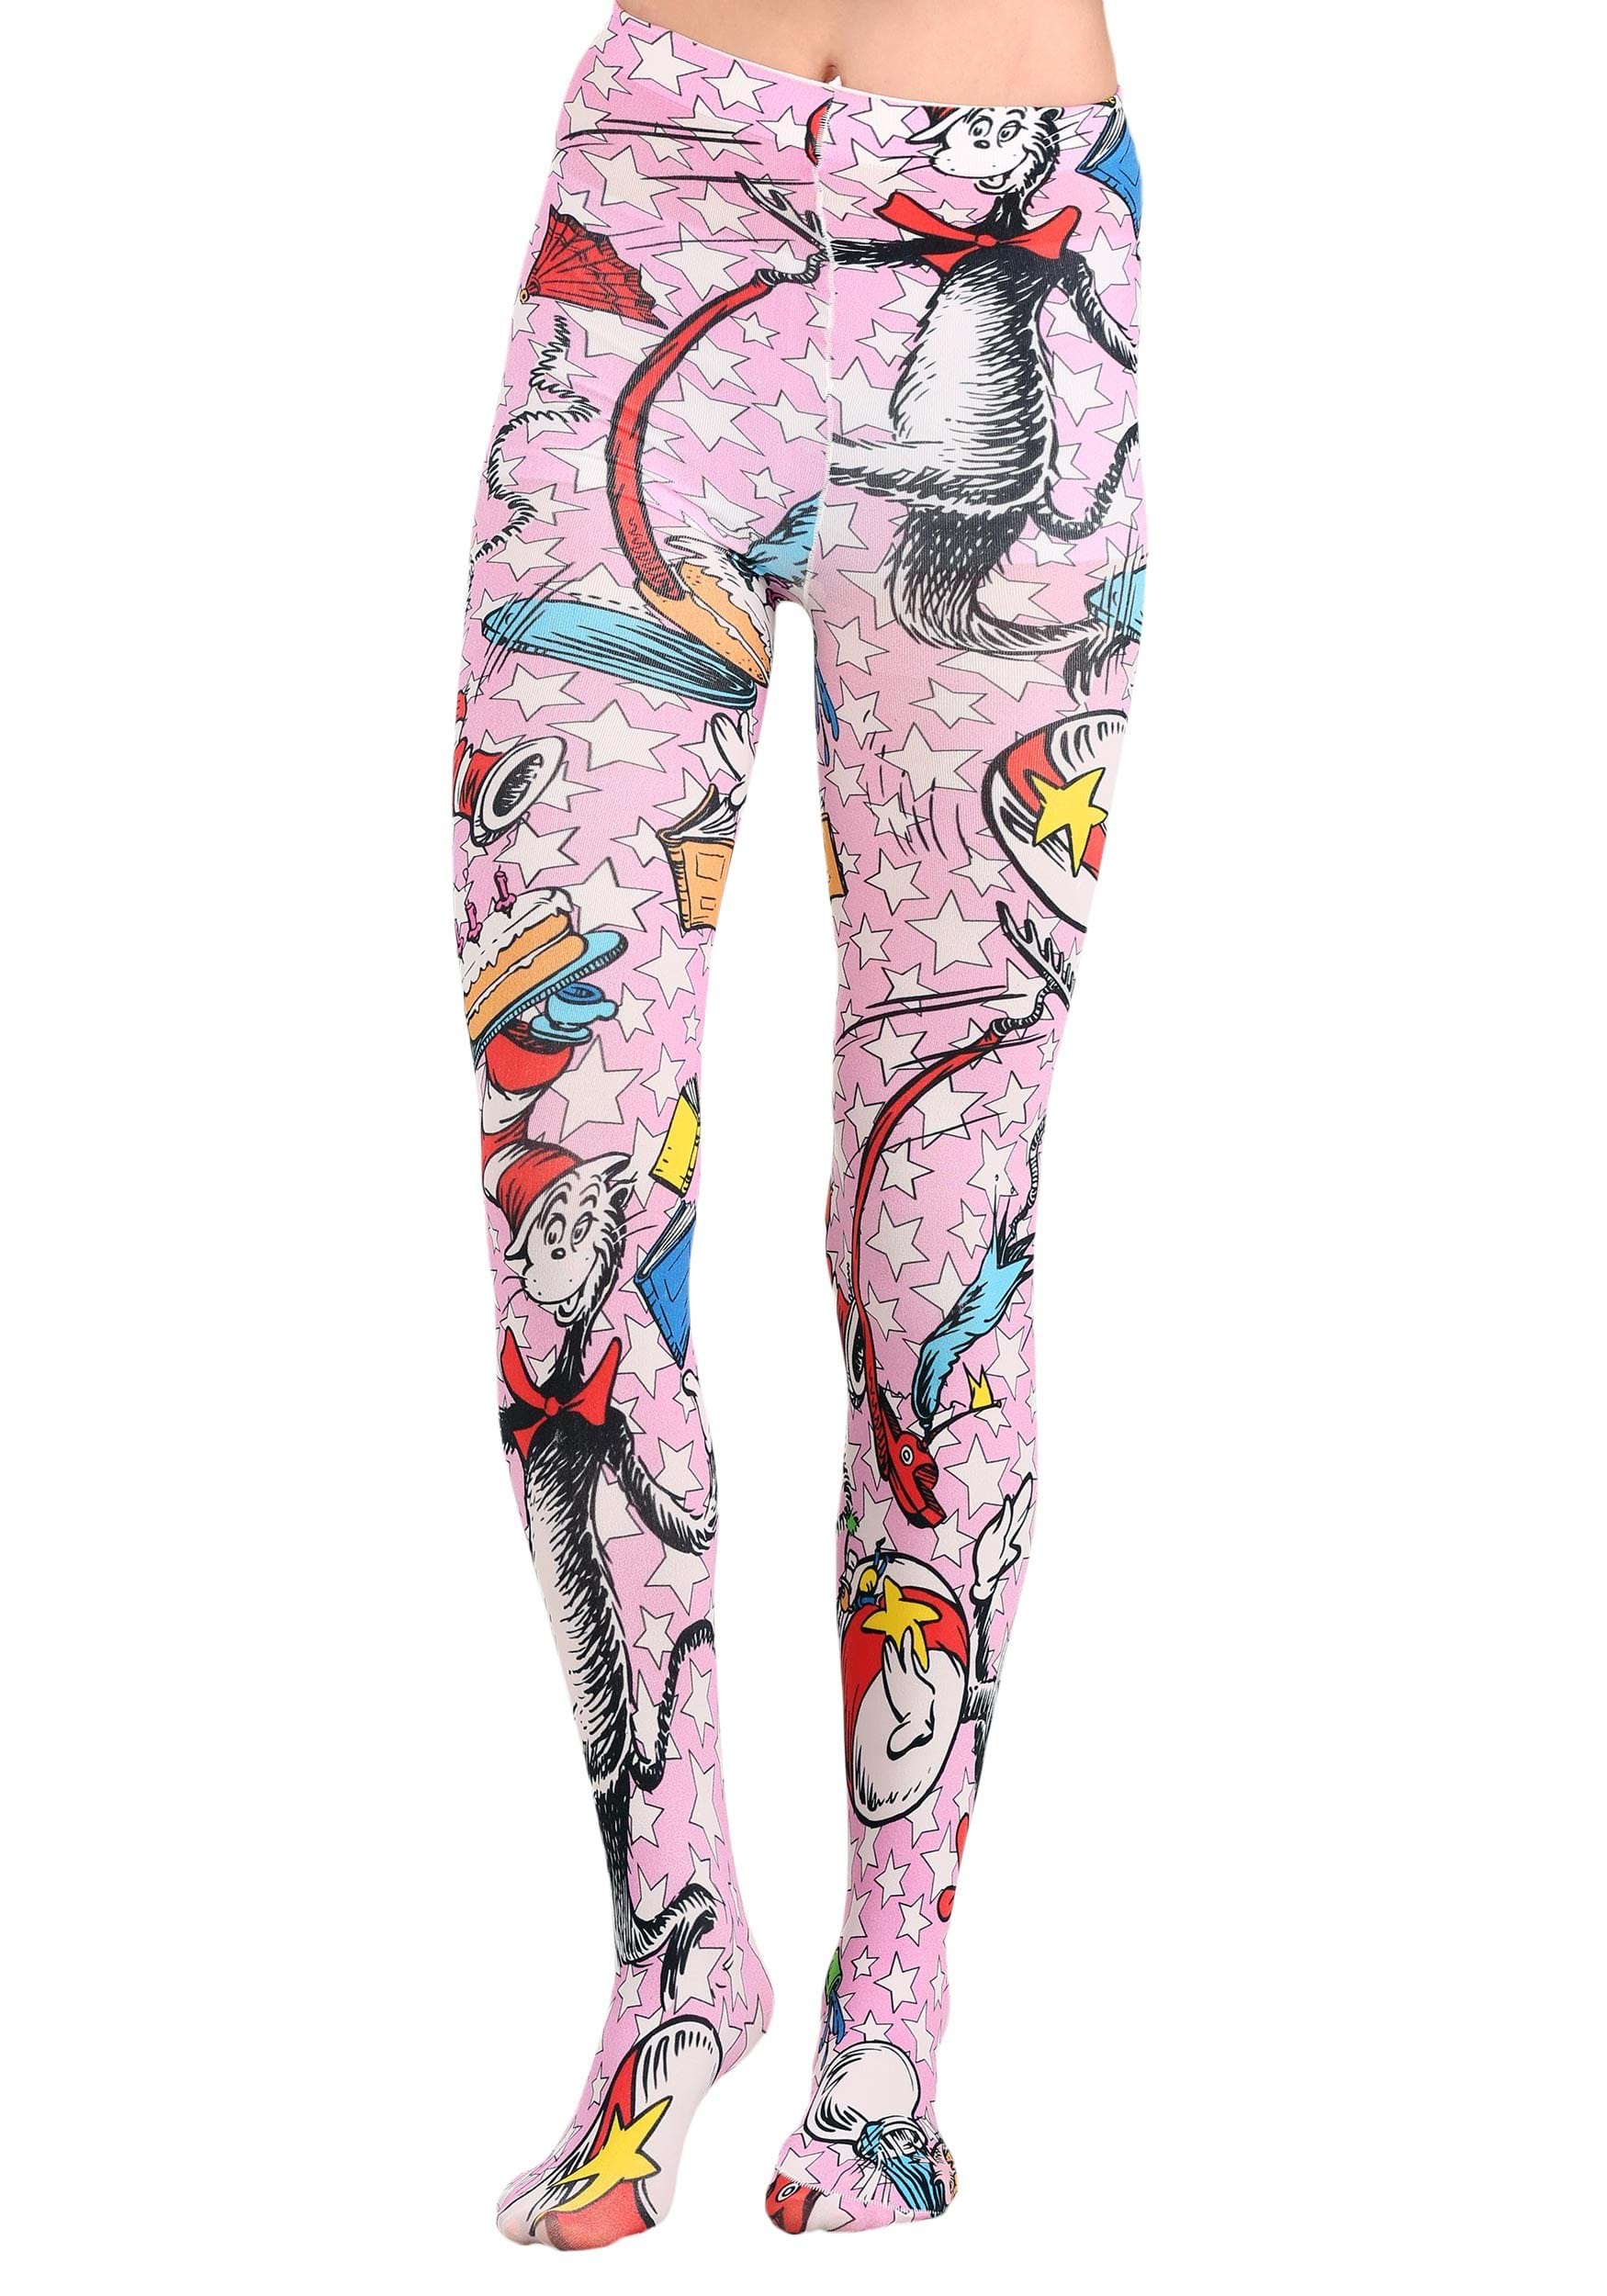 Irregular Choice Cat in the Hat Tights for Adults